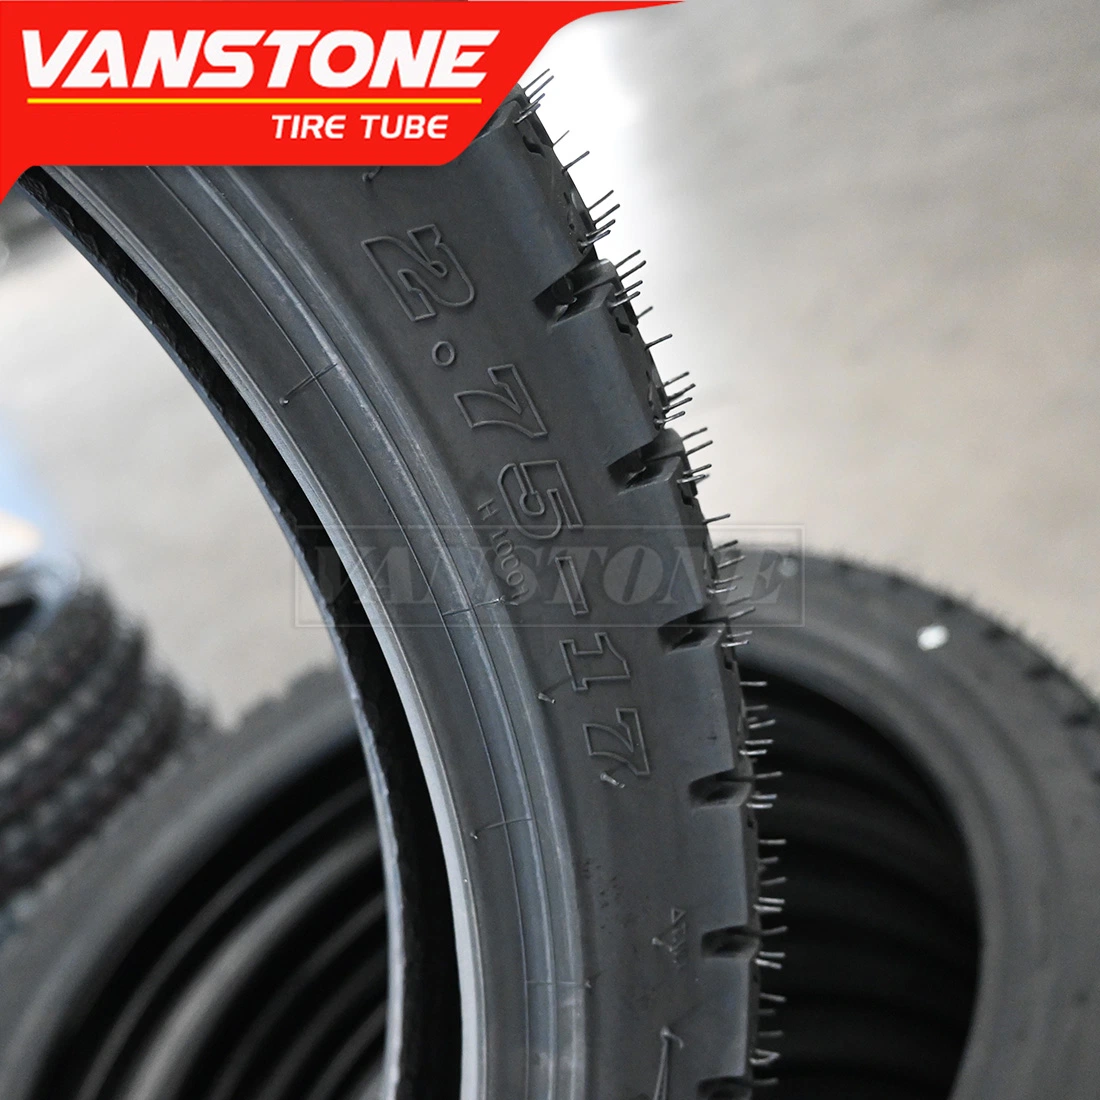 Motorcycle Tyre Factory Reliable Motorcycle Tires Reliable Feedback 2.75-17